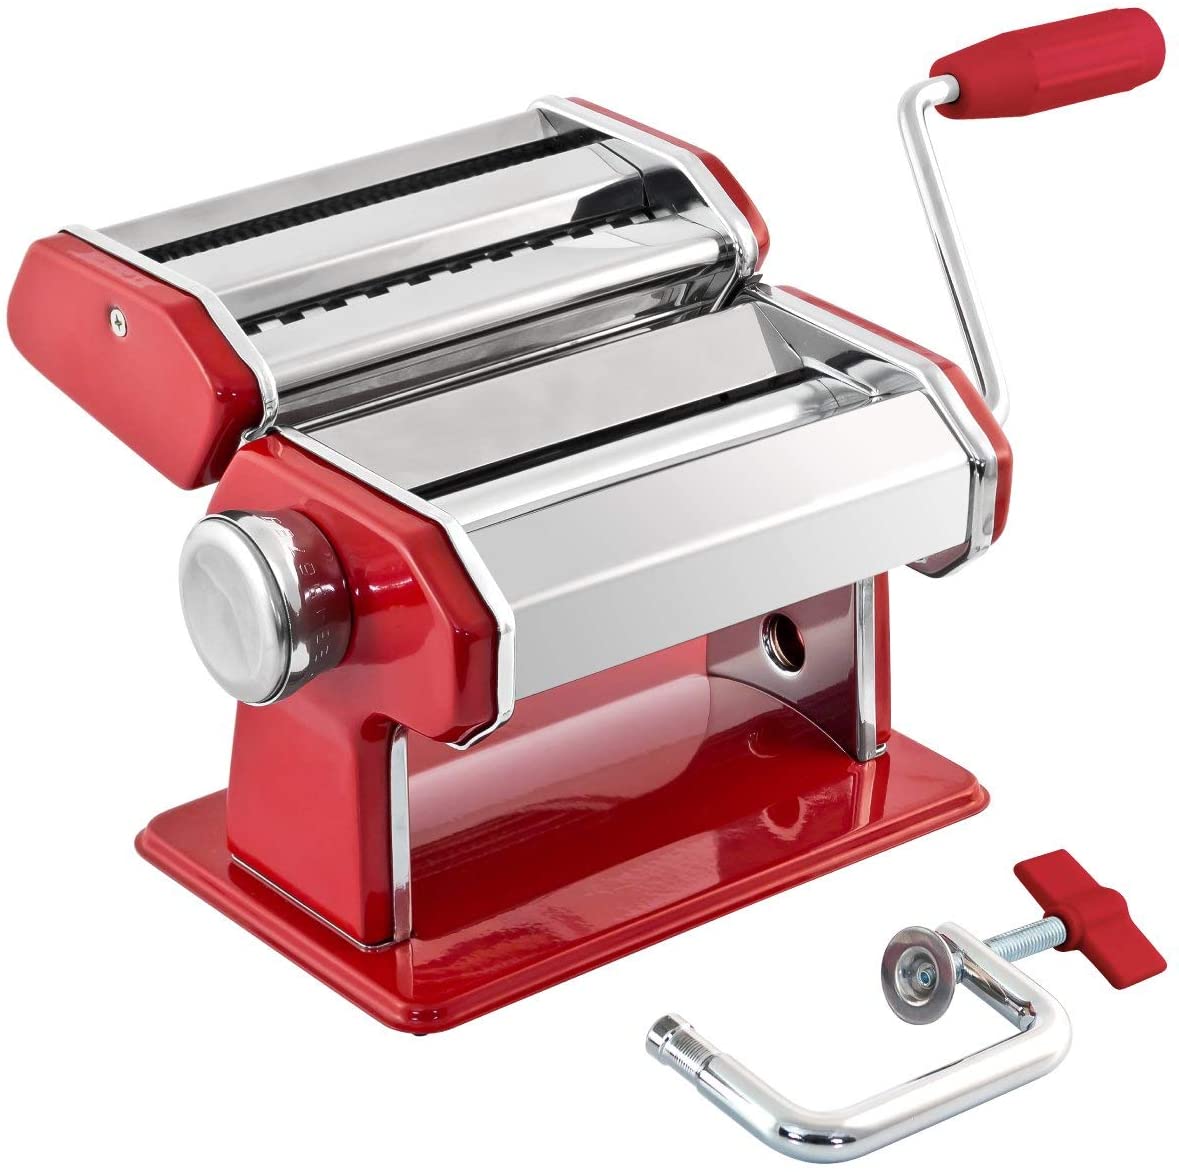 GOURMEX Red Stainless Manual Pasta Maker Machine